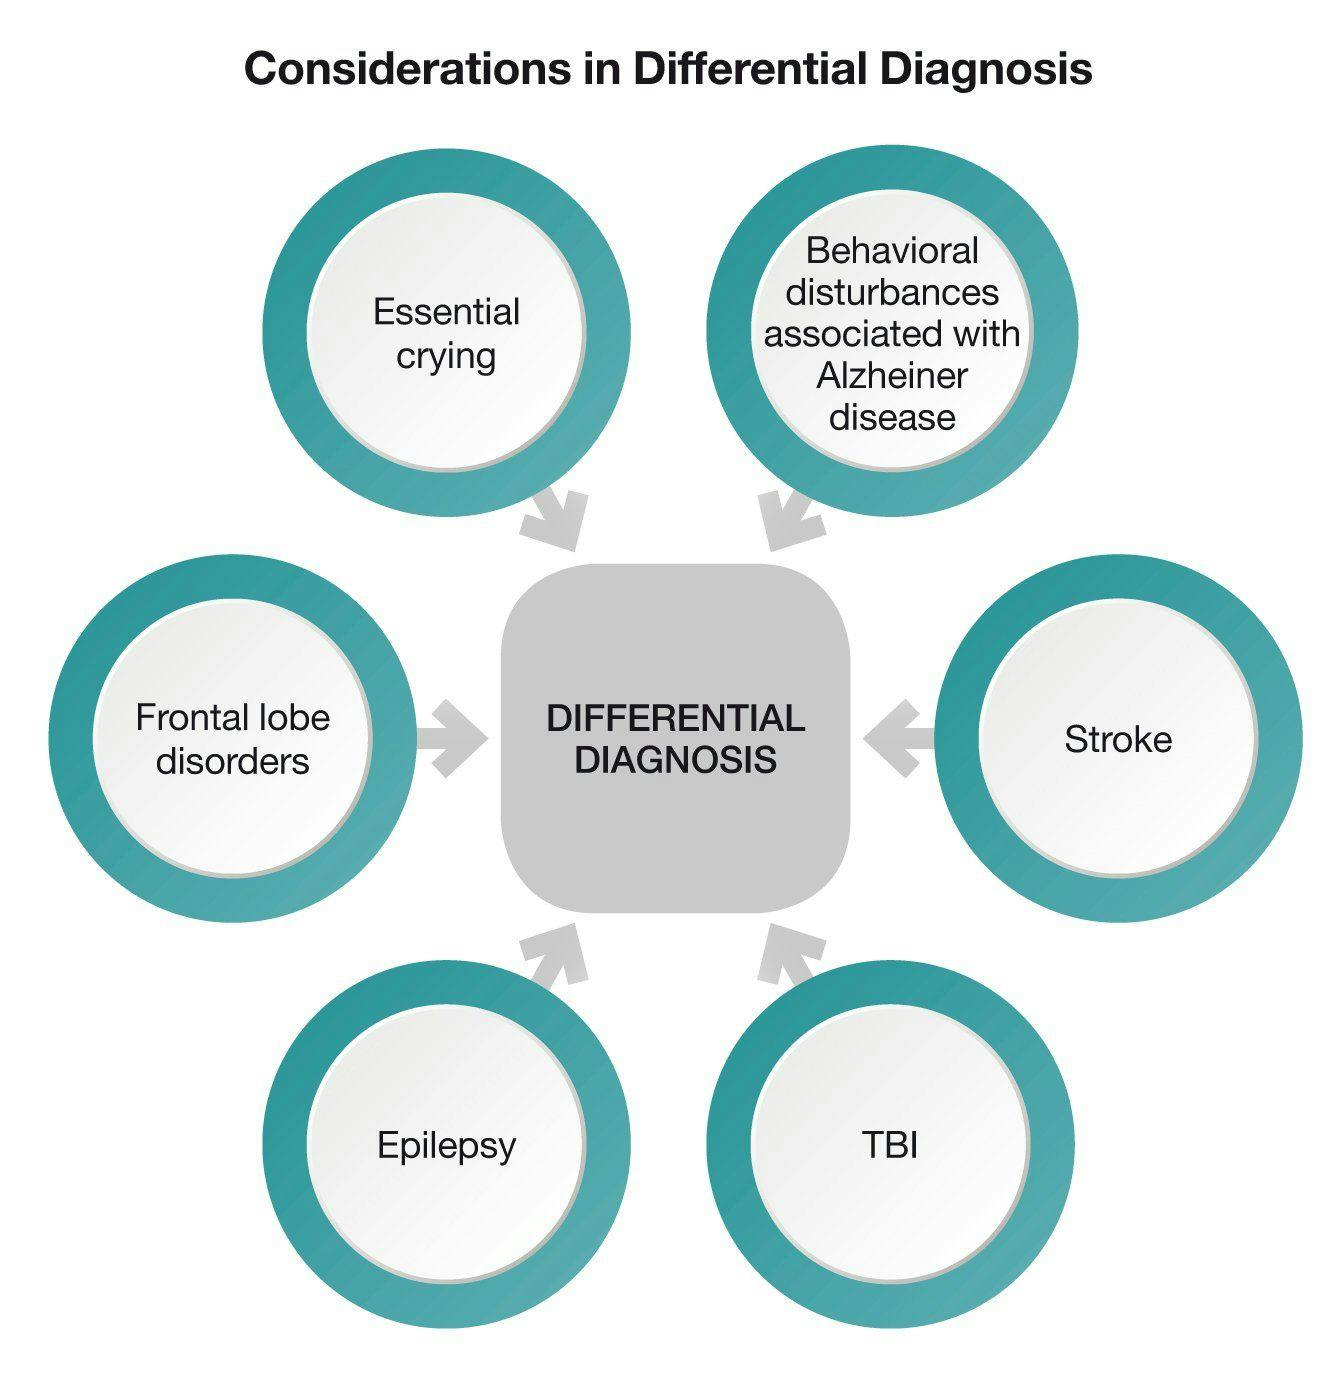 Considerations in Differential Diagnosis